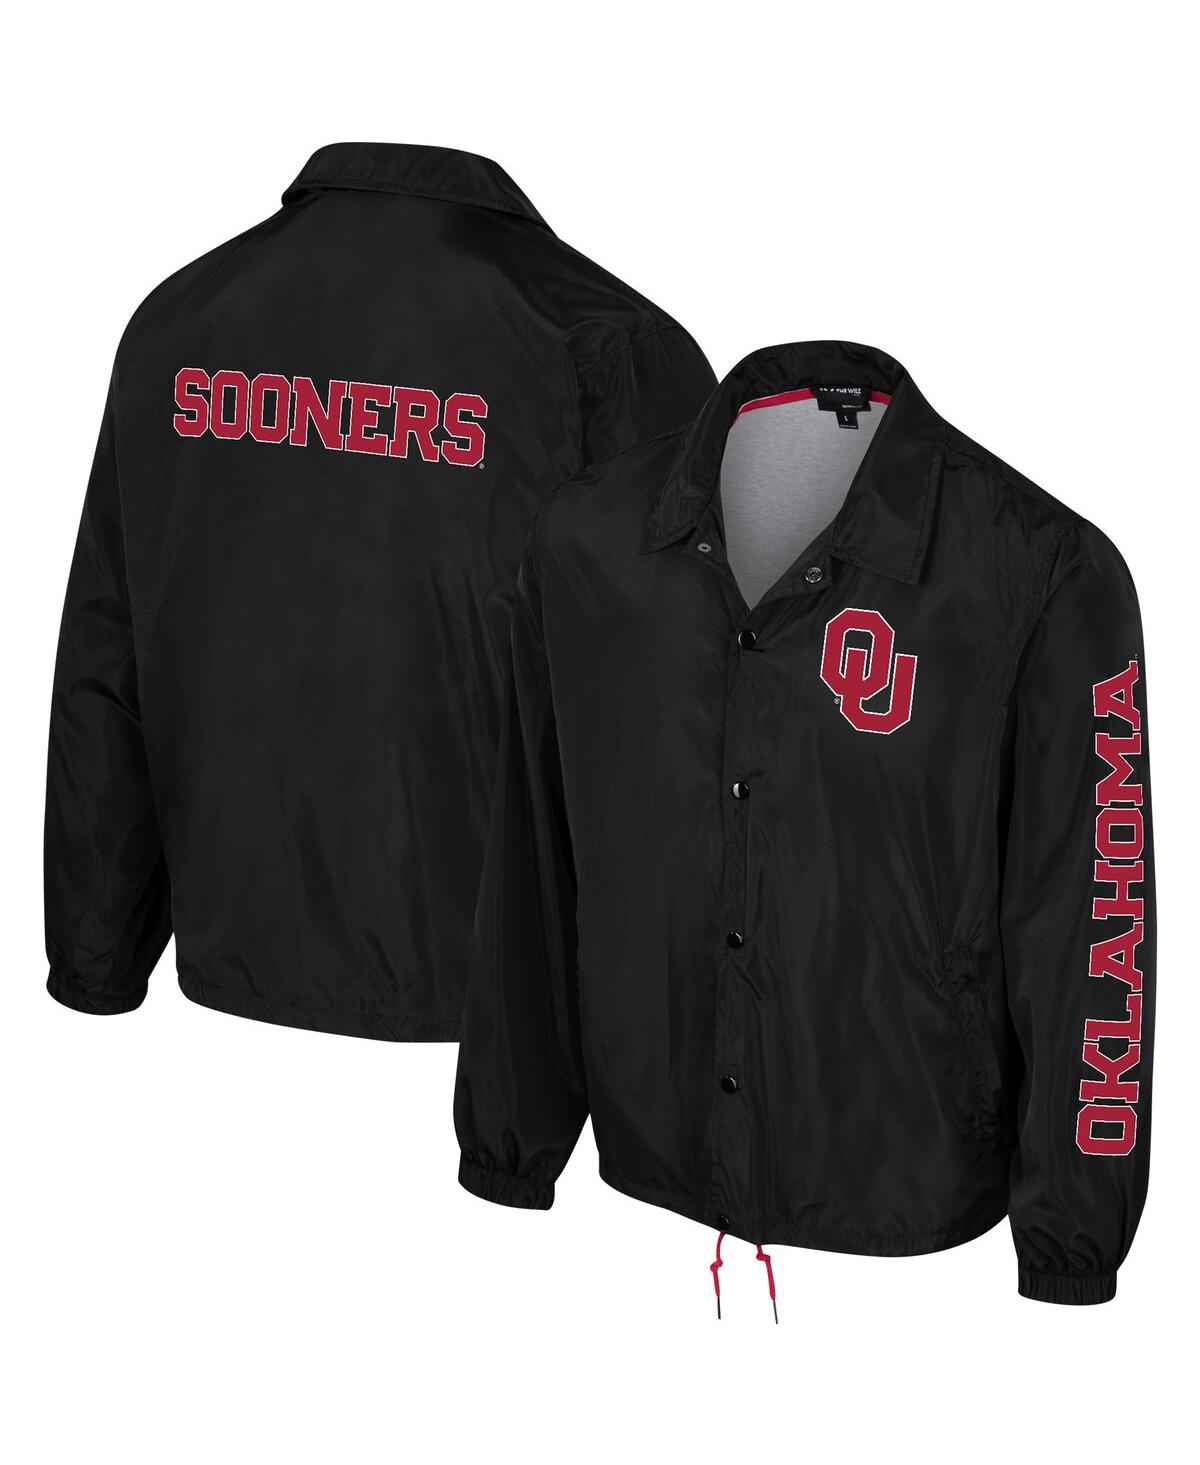 Men's and Women's The Wild Collective Black Oklahoma Sooners Coaches Full-Snap Jacket - Black